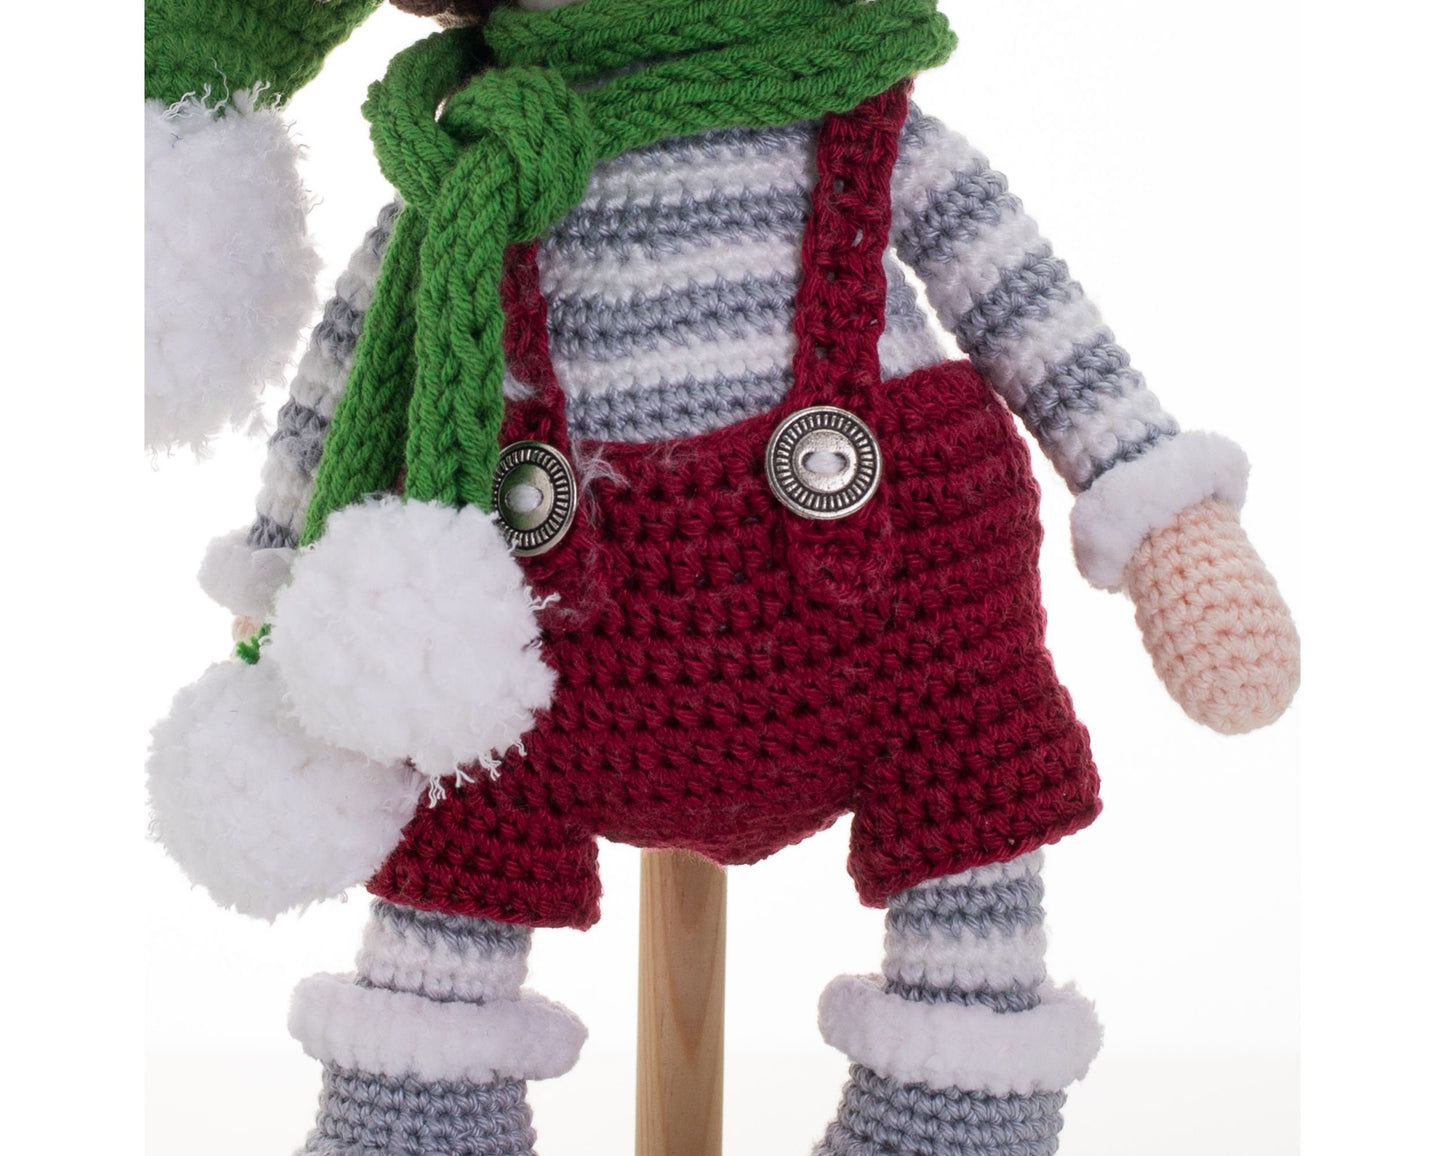 Crochet Boy Doll with Green Beanie Hat and Scarf